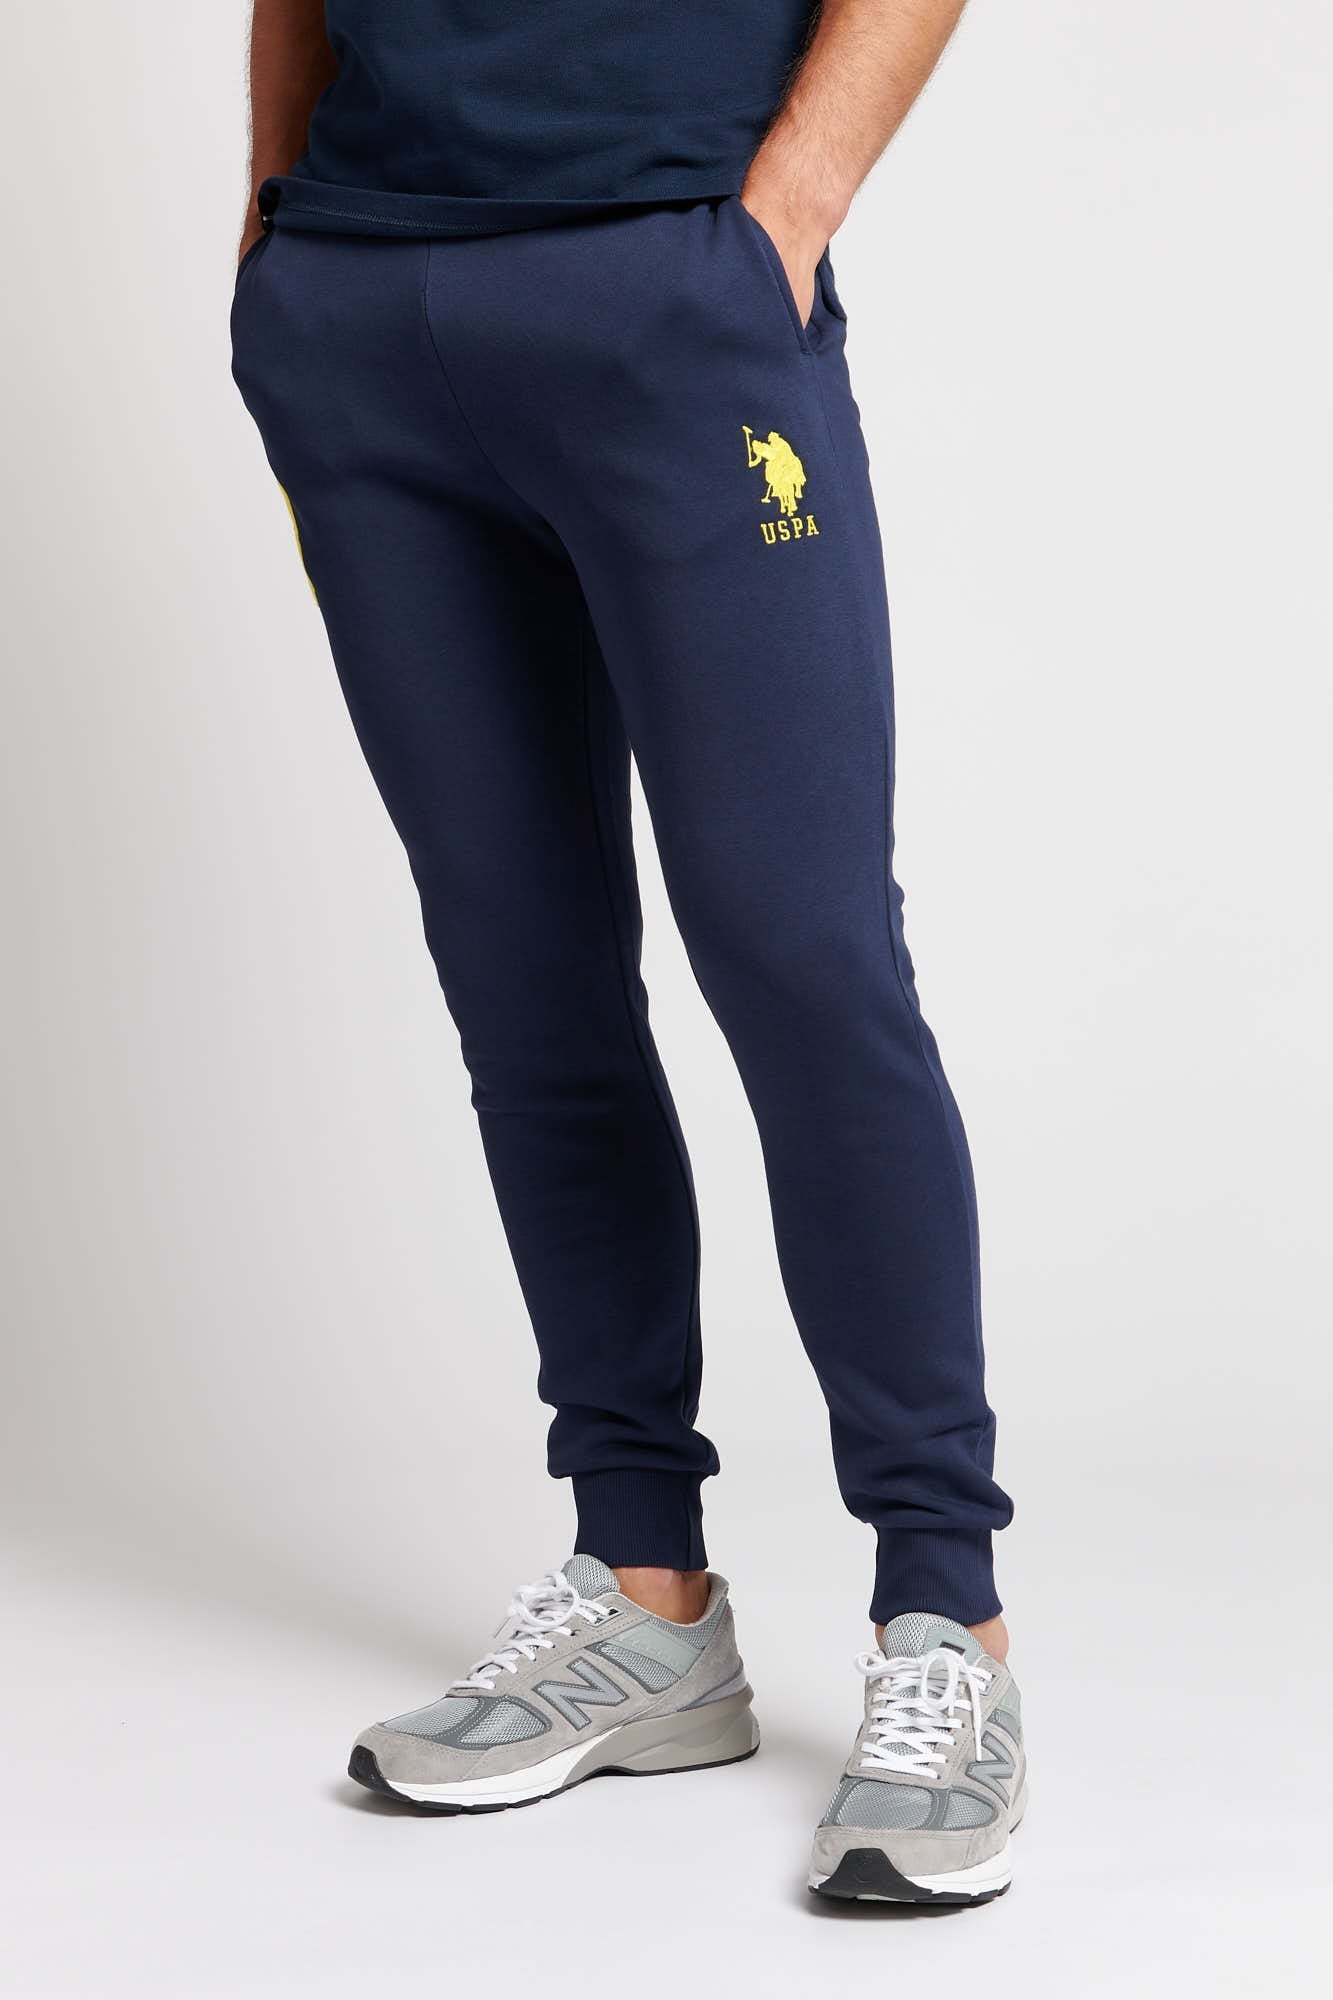 U.S. Polo Assn. Mens Player 3 Joggers in Navy Blazer Yellow DHM